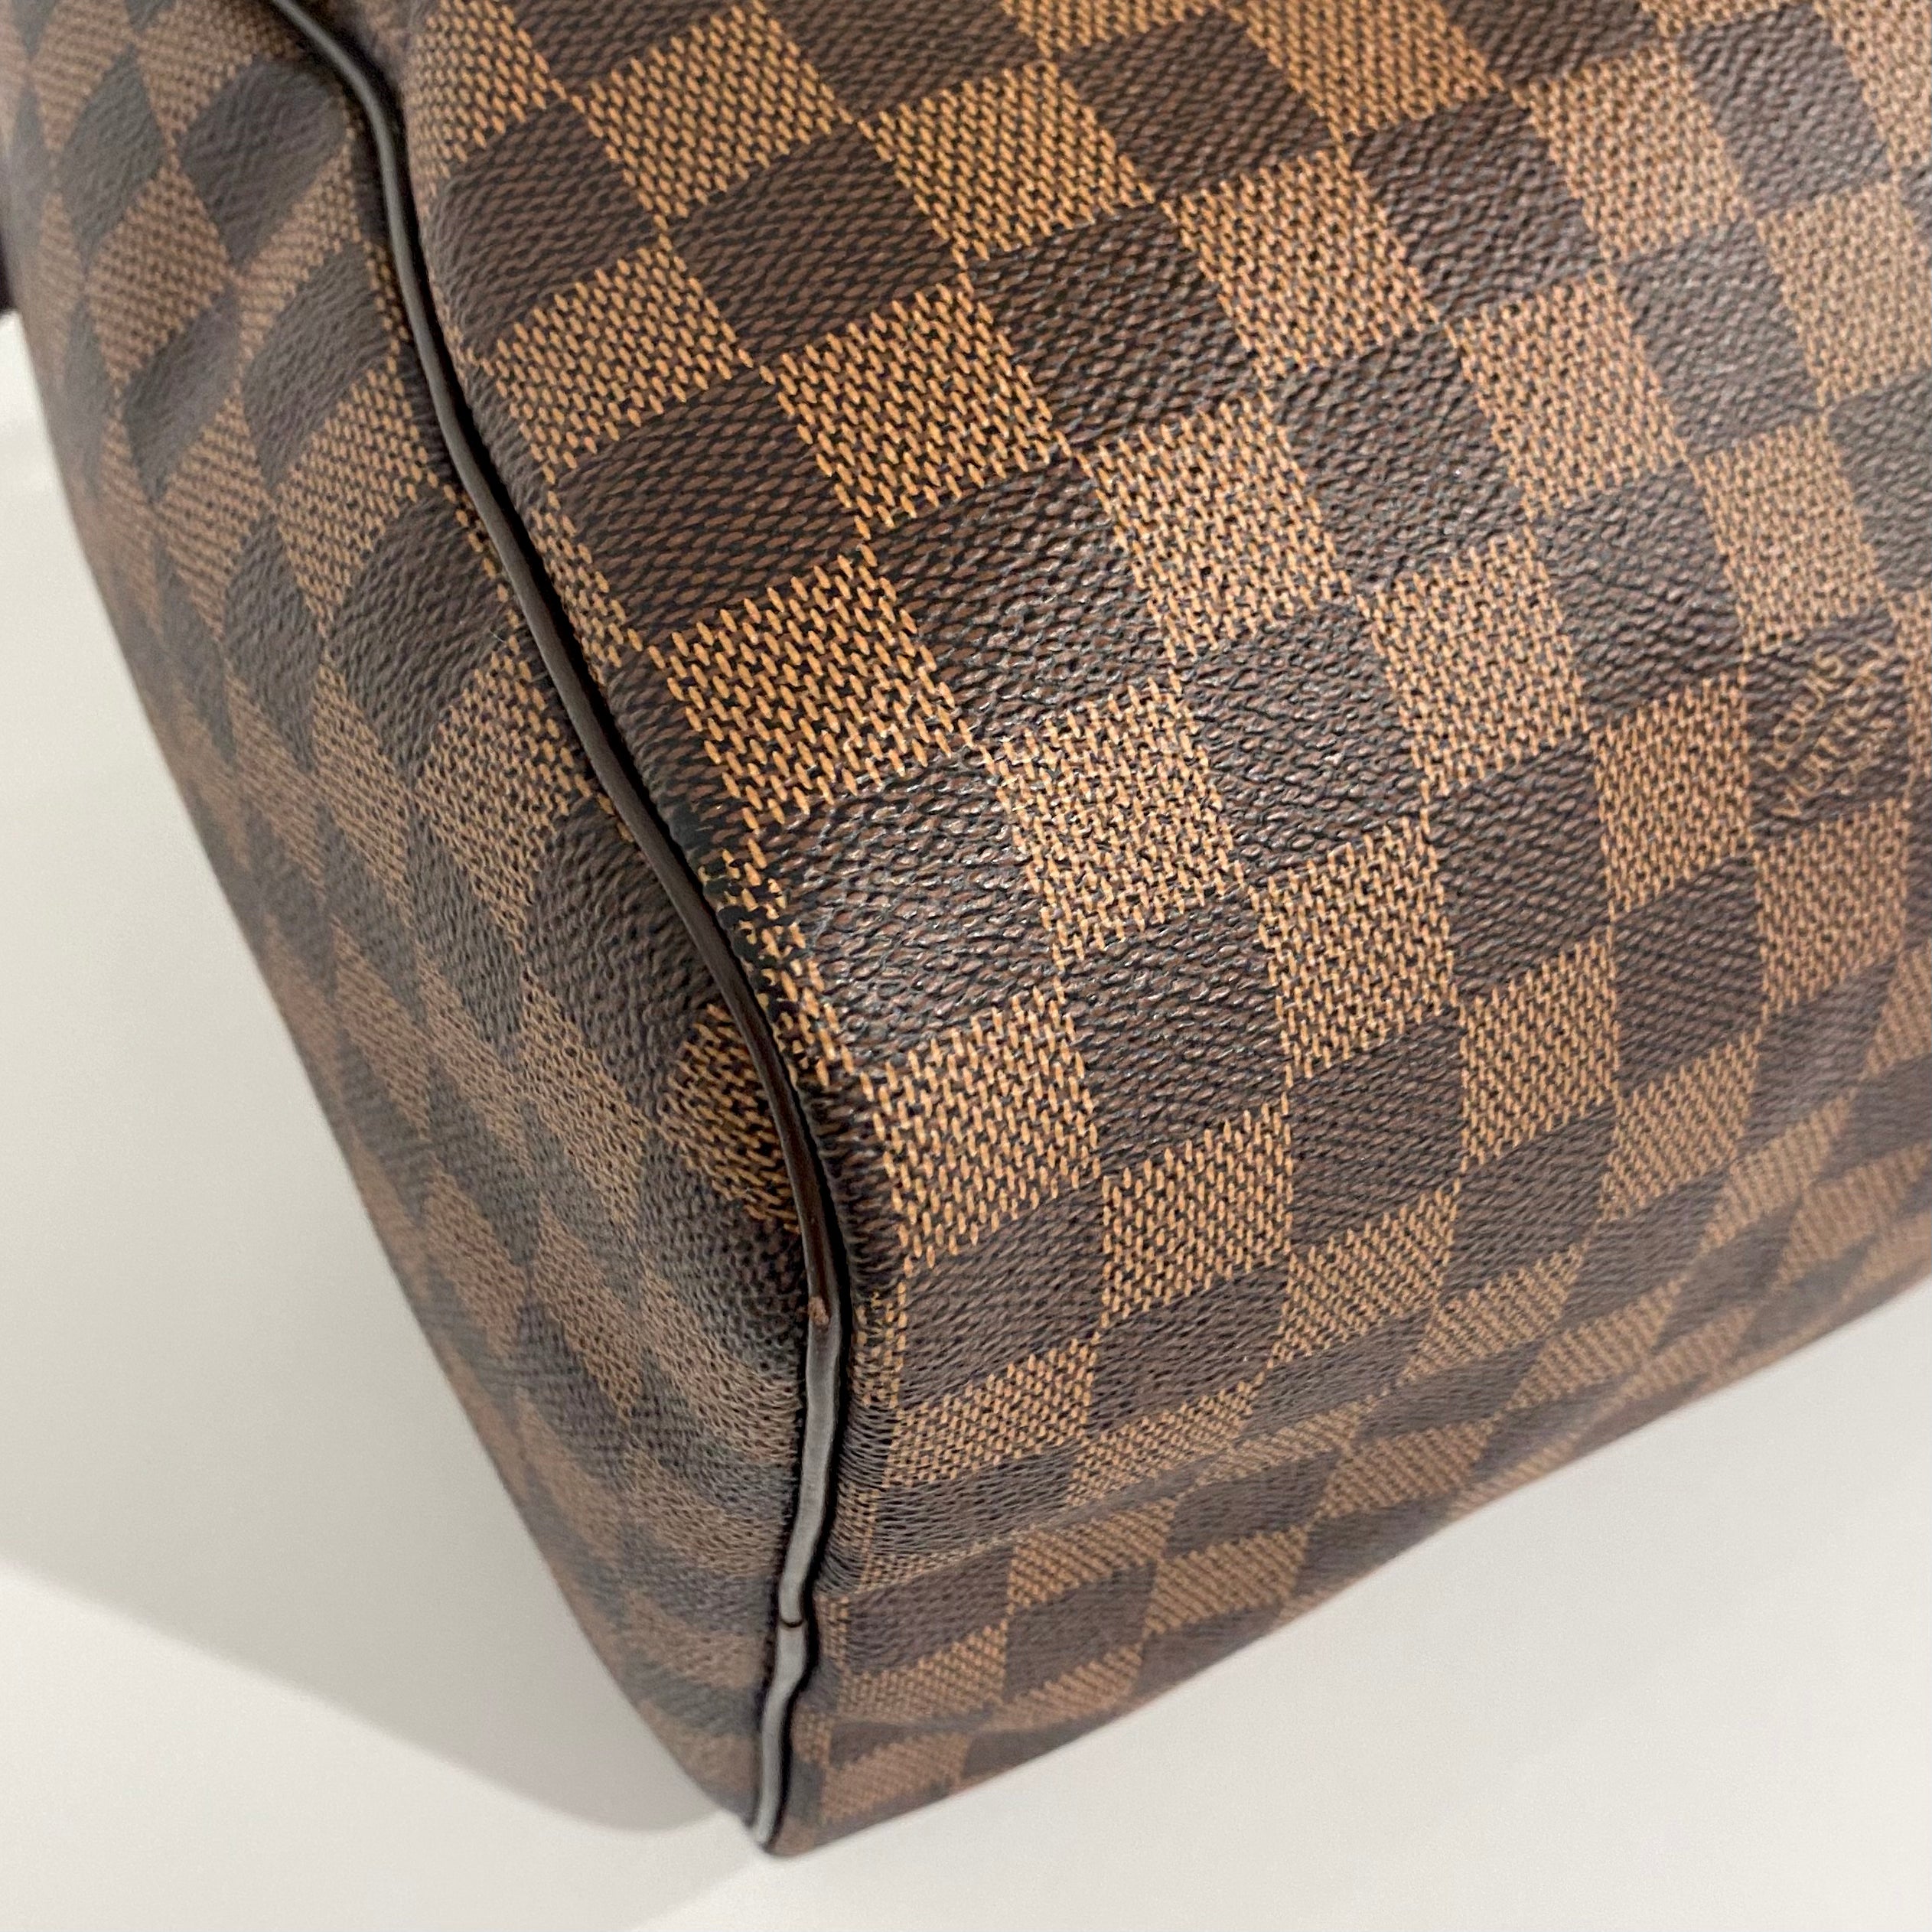 Screenshots Photo Booth - ✨LOUIS VUITTON RAFFLE ✨ Raffling a preloved  Authentic LV Speedy 35 in Damier Ebene. Date code SD0038 Since it is  preloved there is some normal wear to this